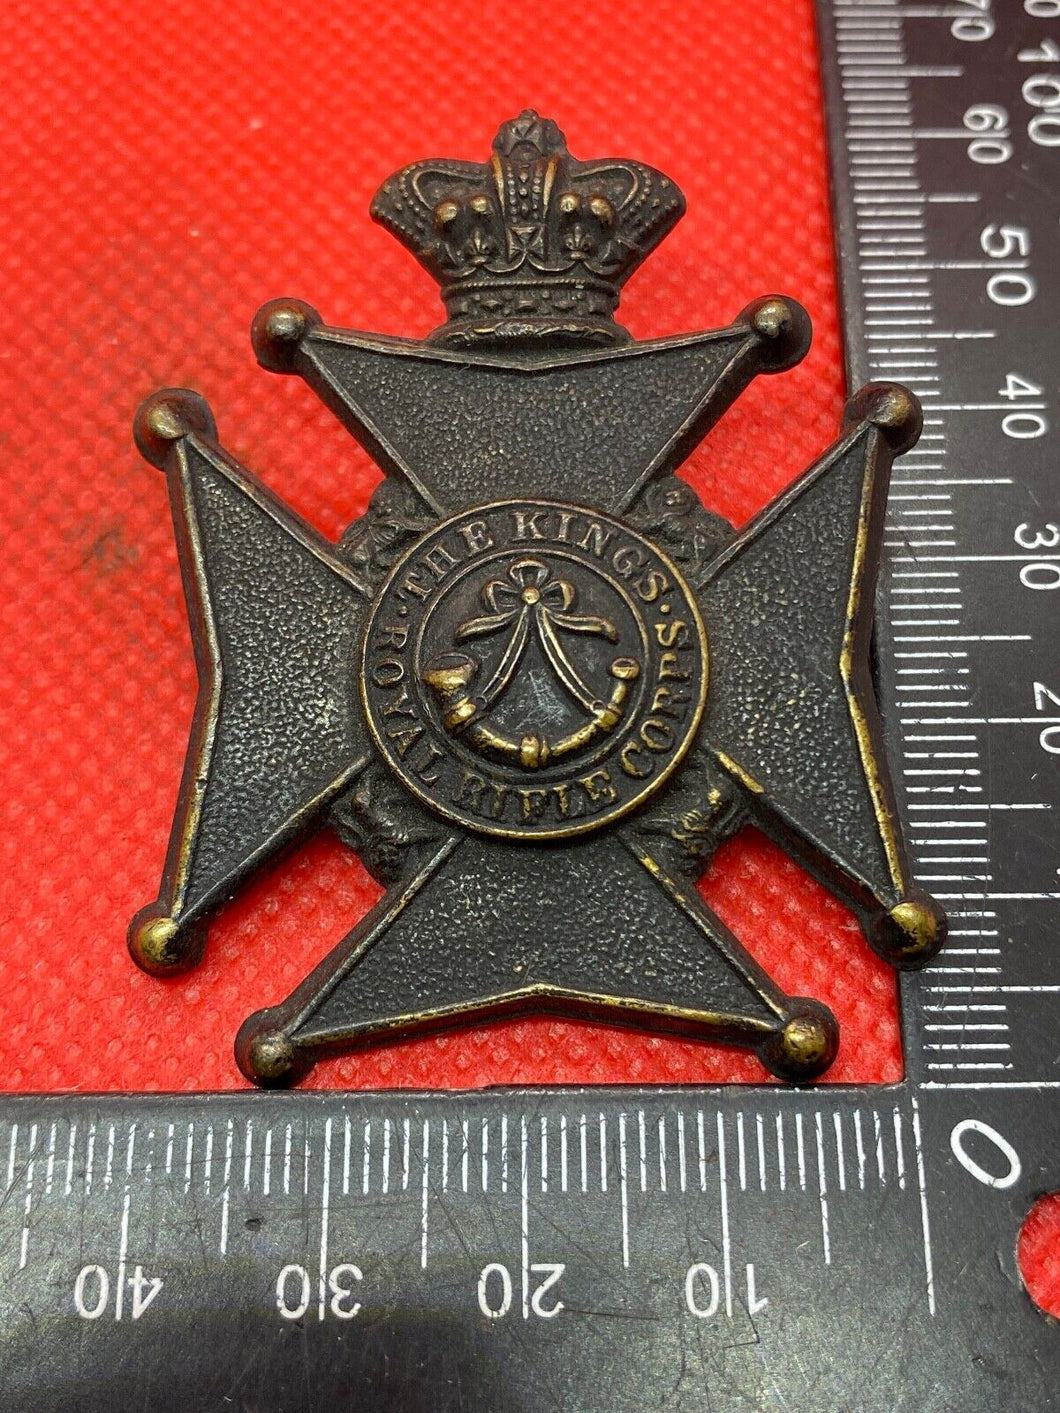 Victorian Crown The King's Royal Rifle Corps Blackened Cap Badge